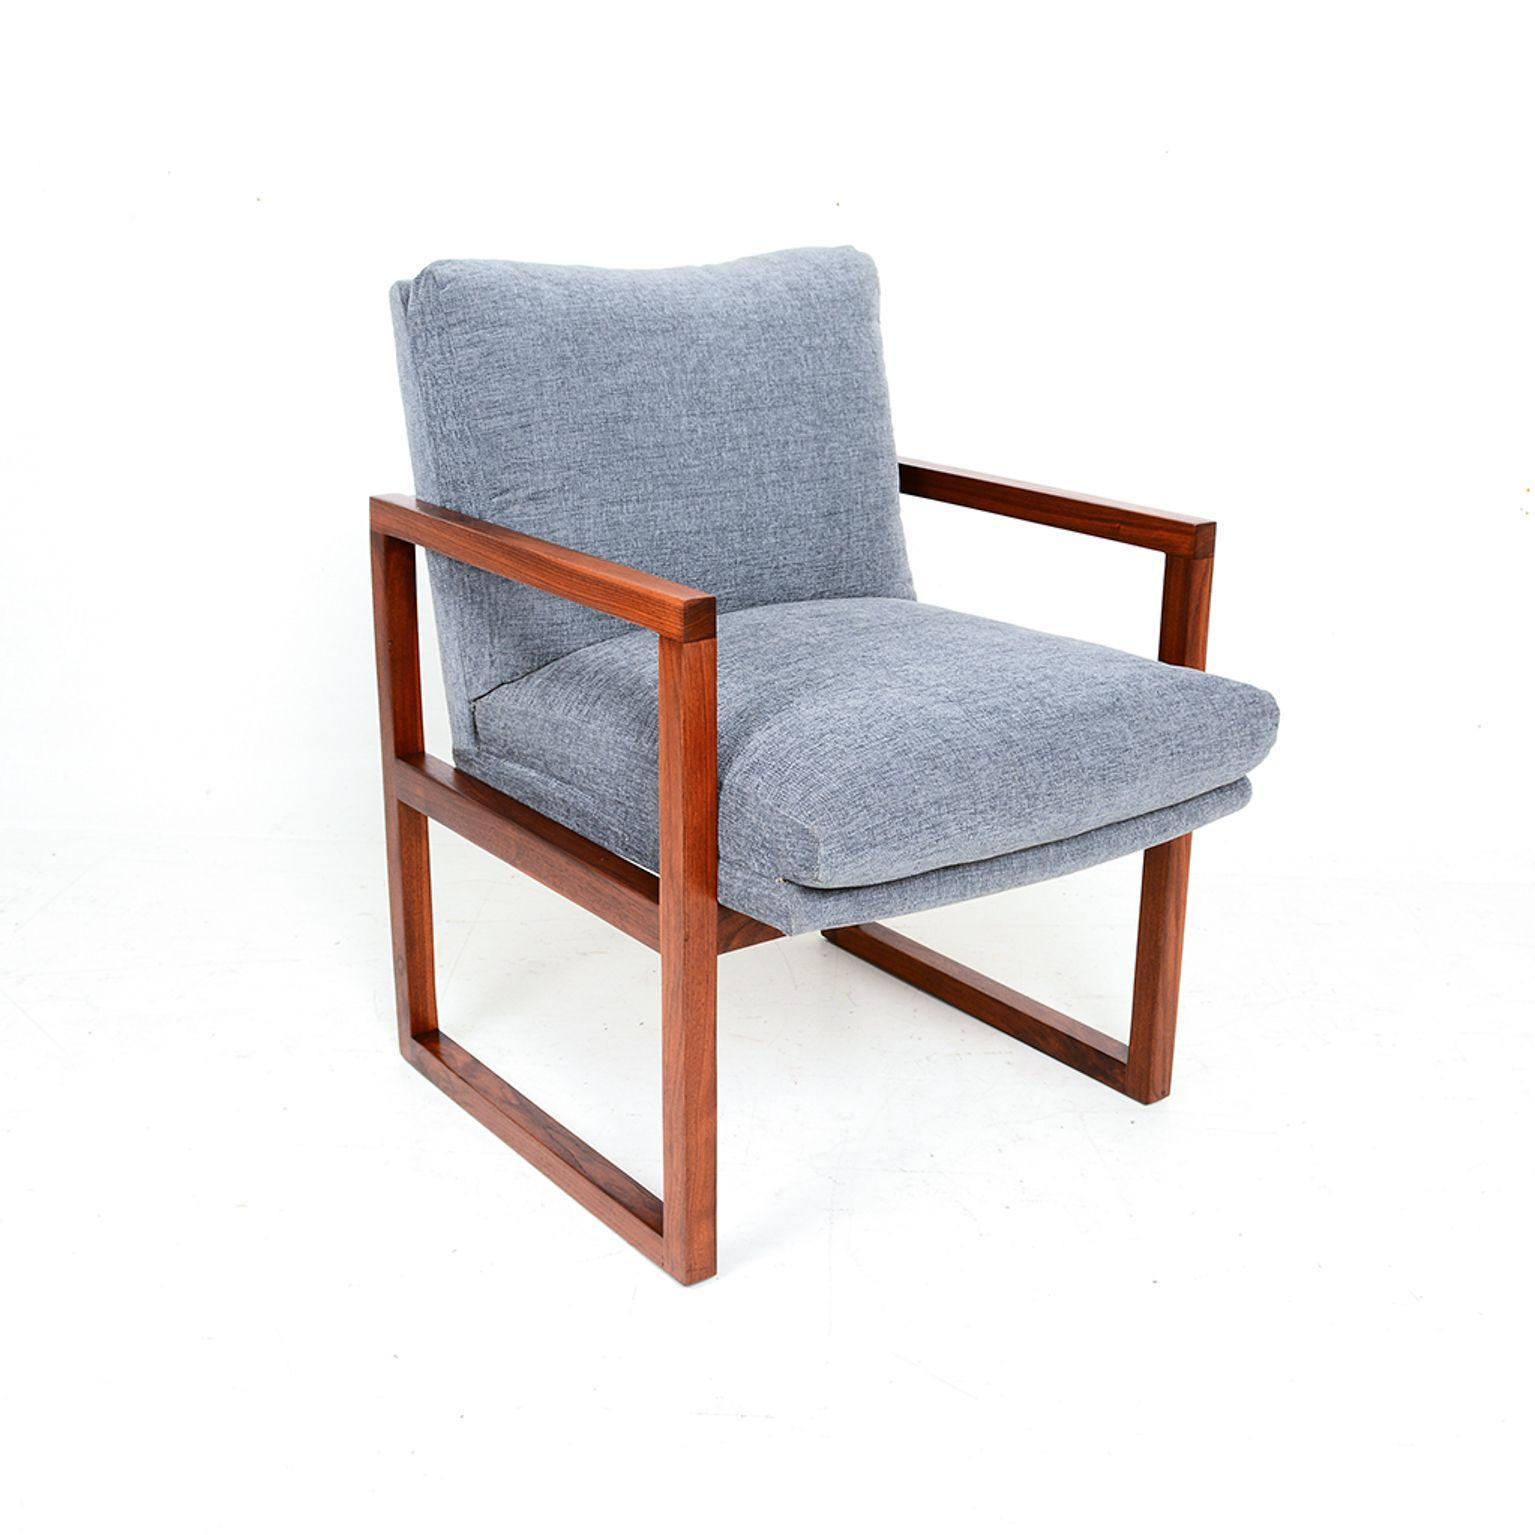 Armchair
Mid Century Modern Armchair solid walnut frame + gray upholstery.
Unmarked. Classic style of Milo Baughman 1960s.
Dimensions: H 32 in. x W 24 in. x D 26 in. Seat H 19
Original Preowned Vintage Condition. Refer to images.
